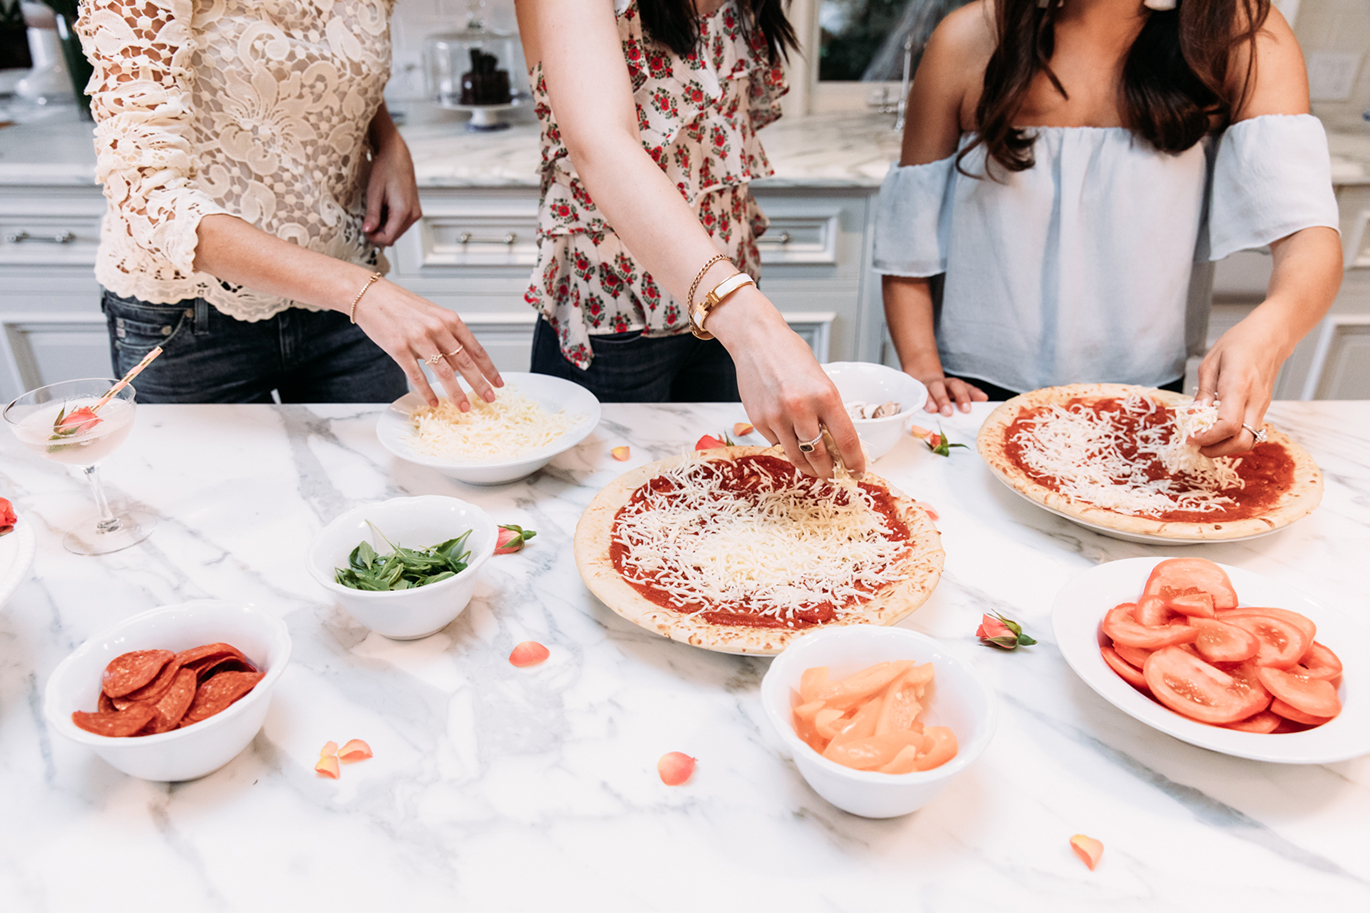 How to throw a pizza making party